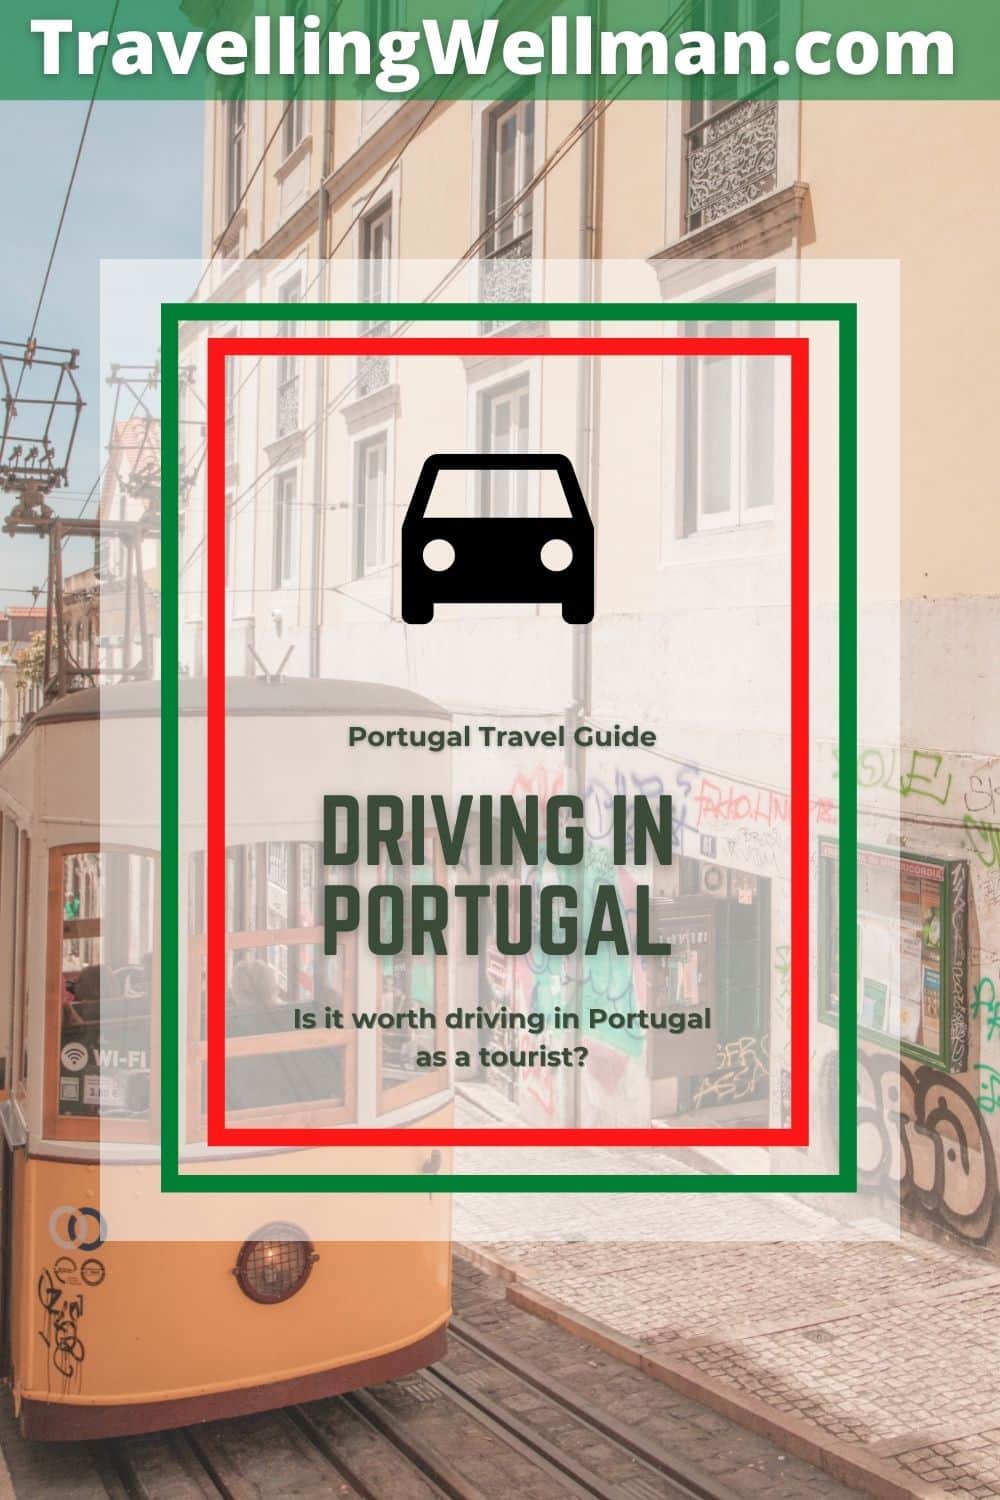 Driving in Portugal